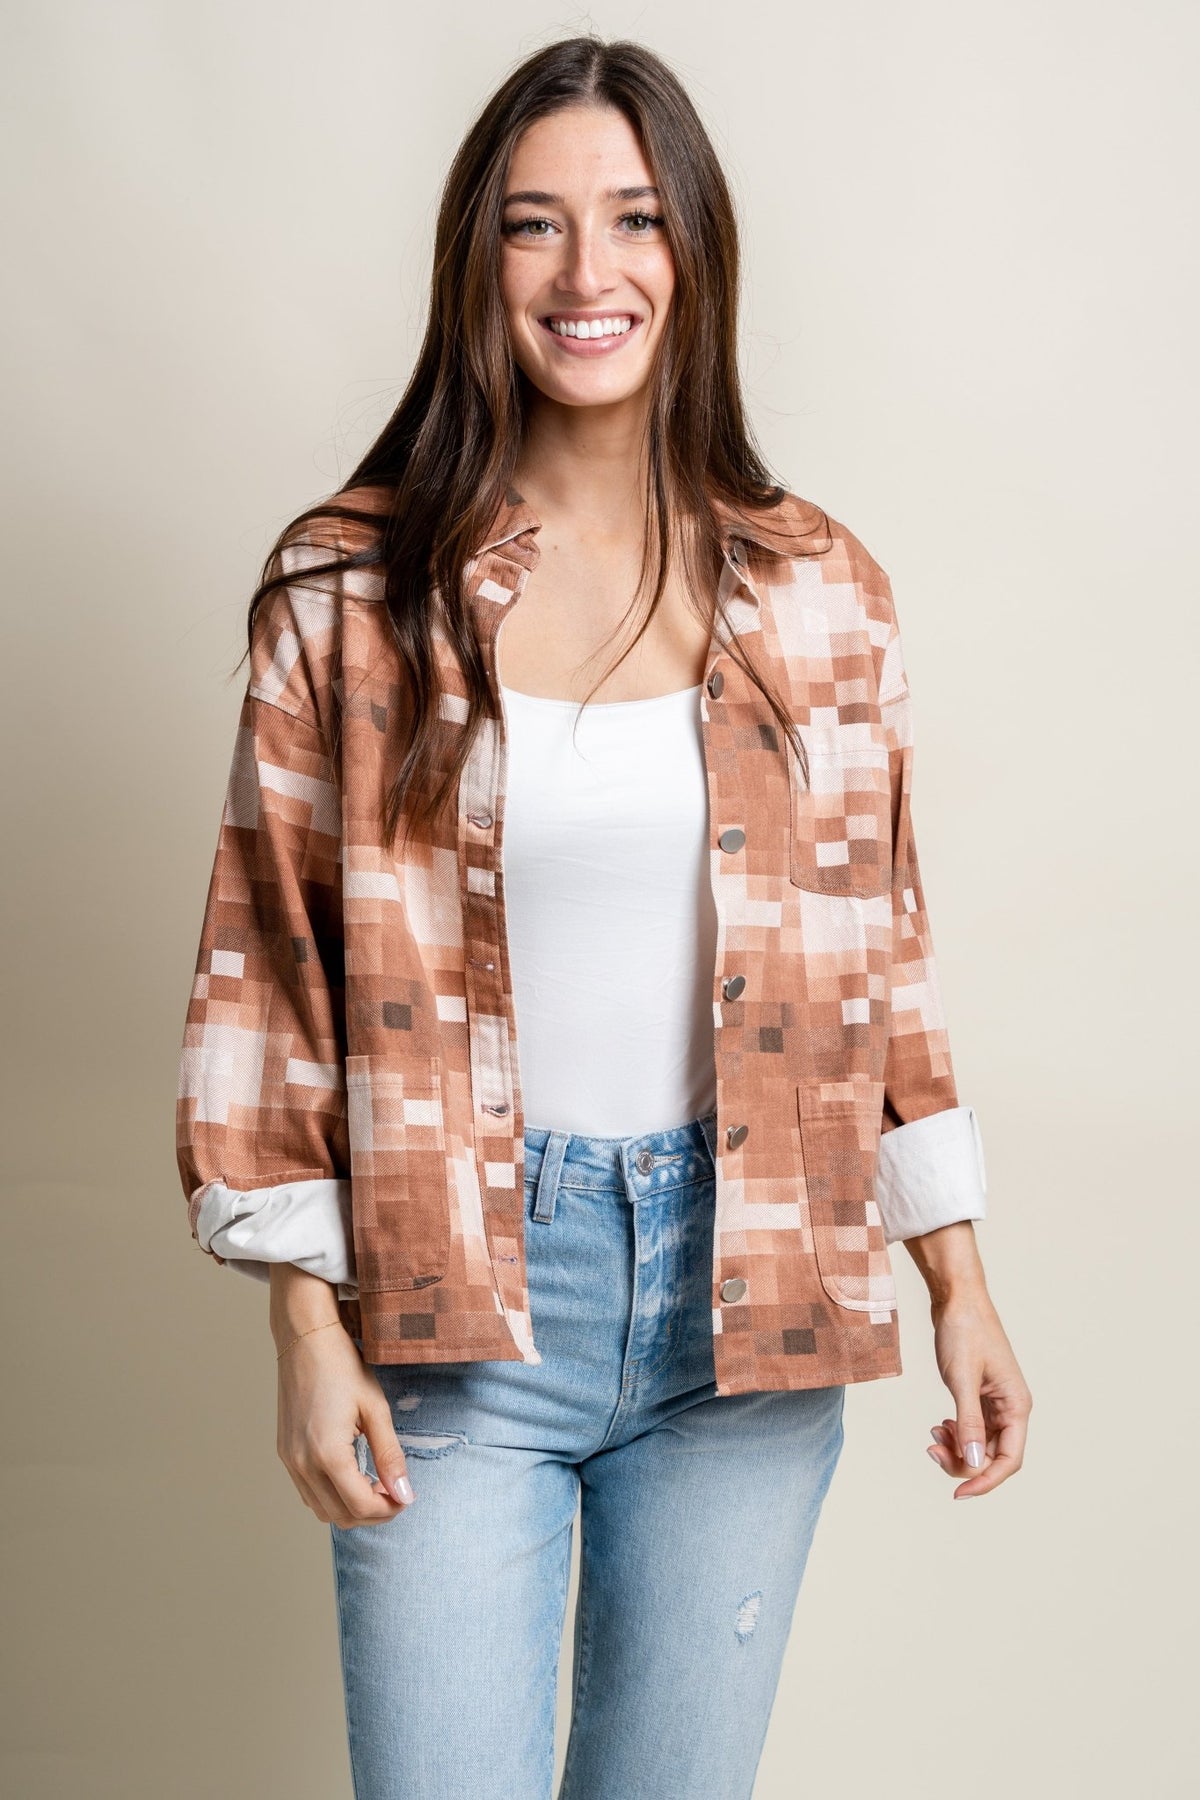 Checkered pocket detail jacket brick - Cute jacket - Trendy Jackets and Blazers at Lush Fashion Lounge Boutique in Oklahoma City